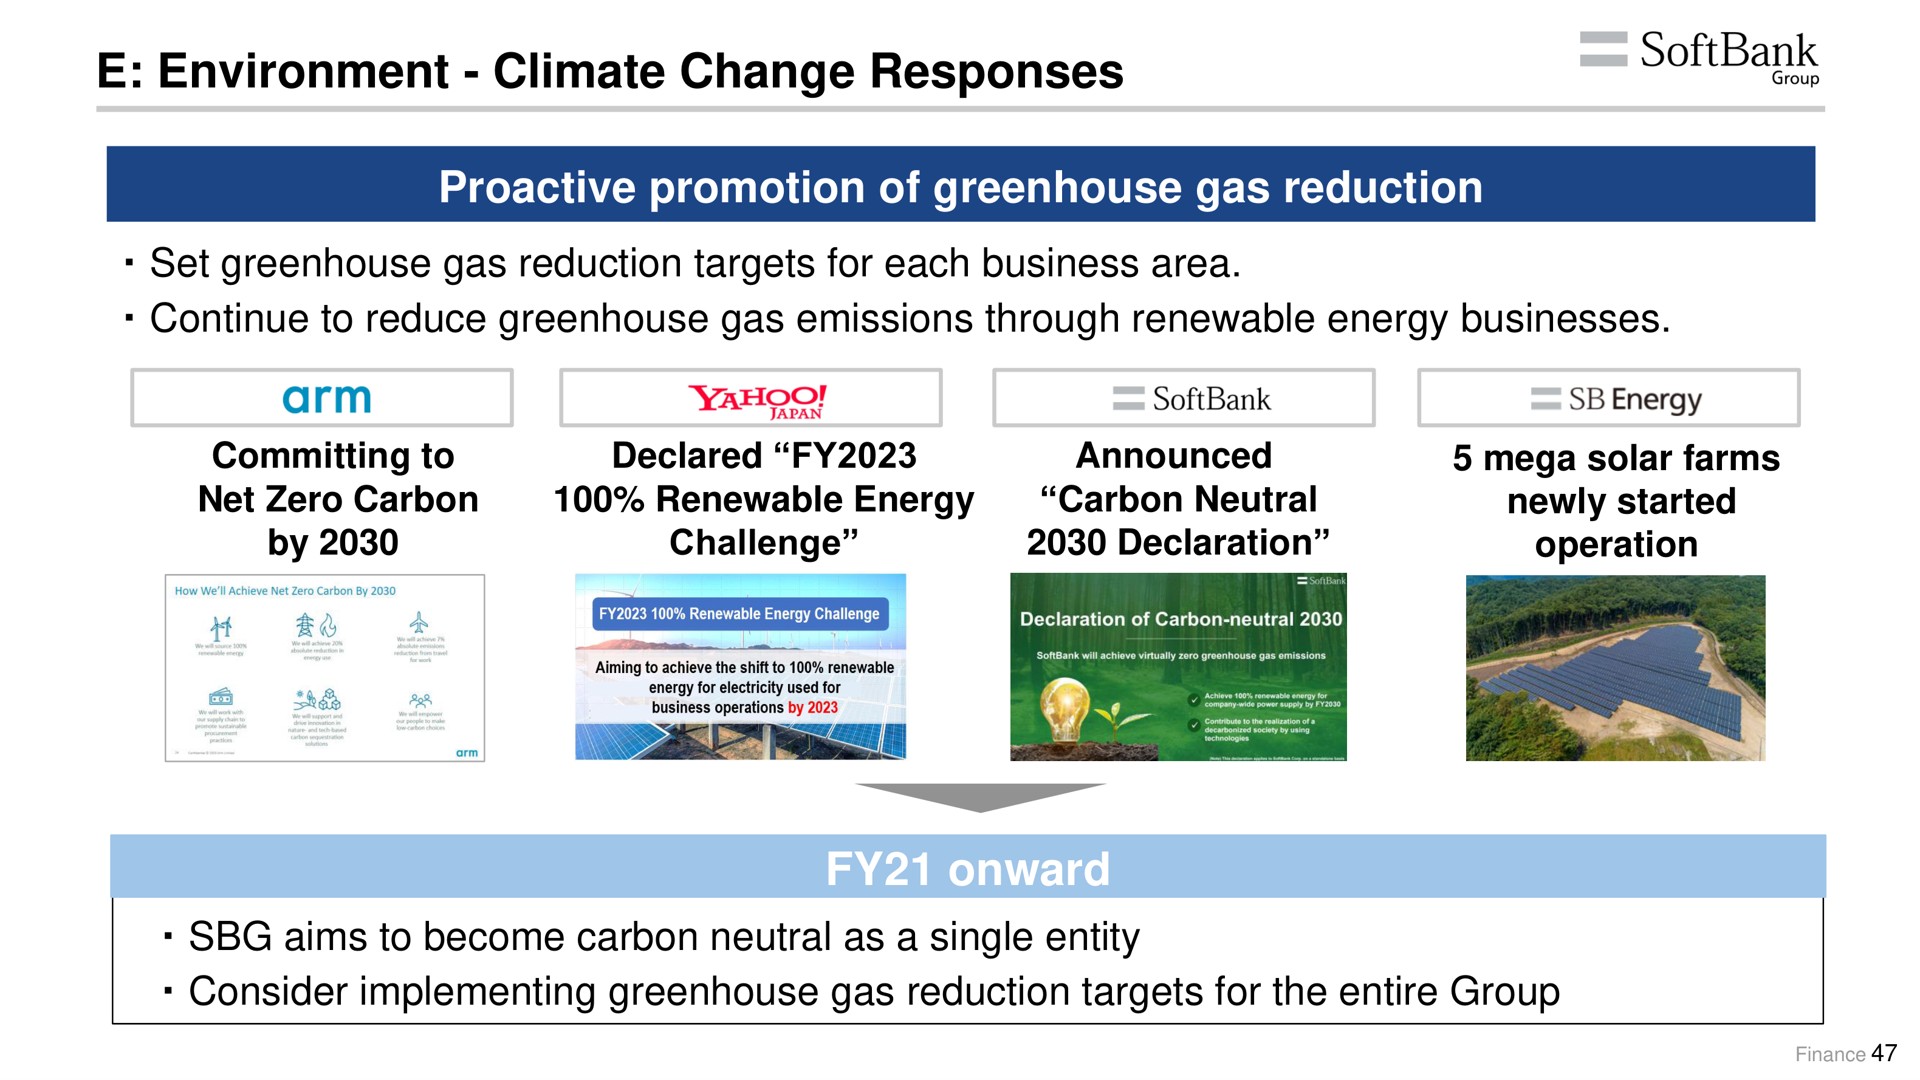 environment climate change responses promotion of greenhouse gas reduction set greenhouse gas reduction targets for each business area continue to reduce greenhouse gas emissions through renewable energy businesses aims to become carbon neutral as a single entity consider implementing greenhouse gas reduction targets for the entire group onward | SoftBank